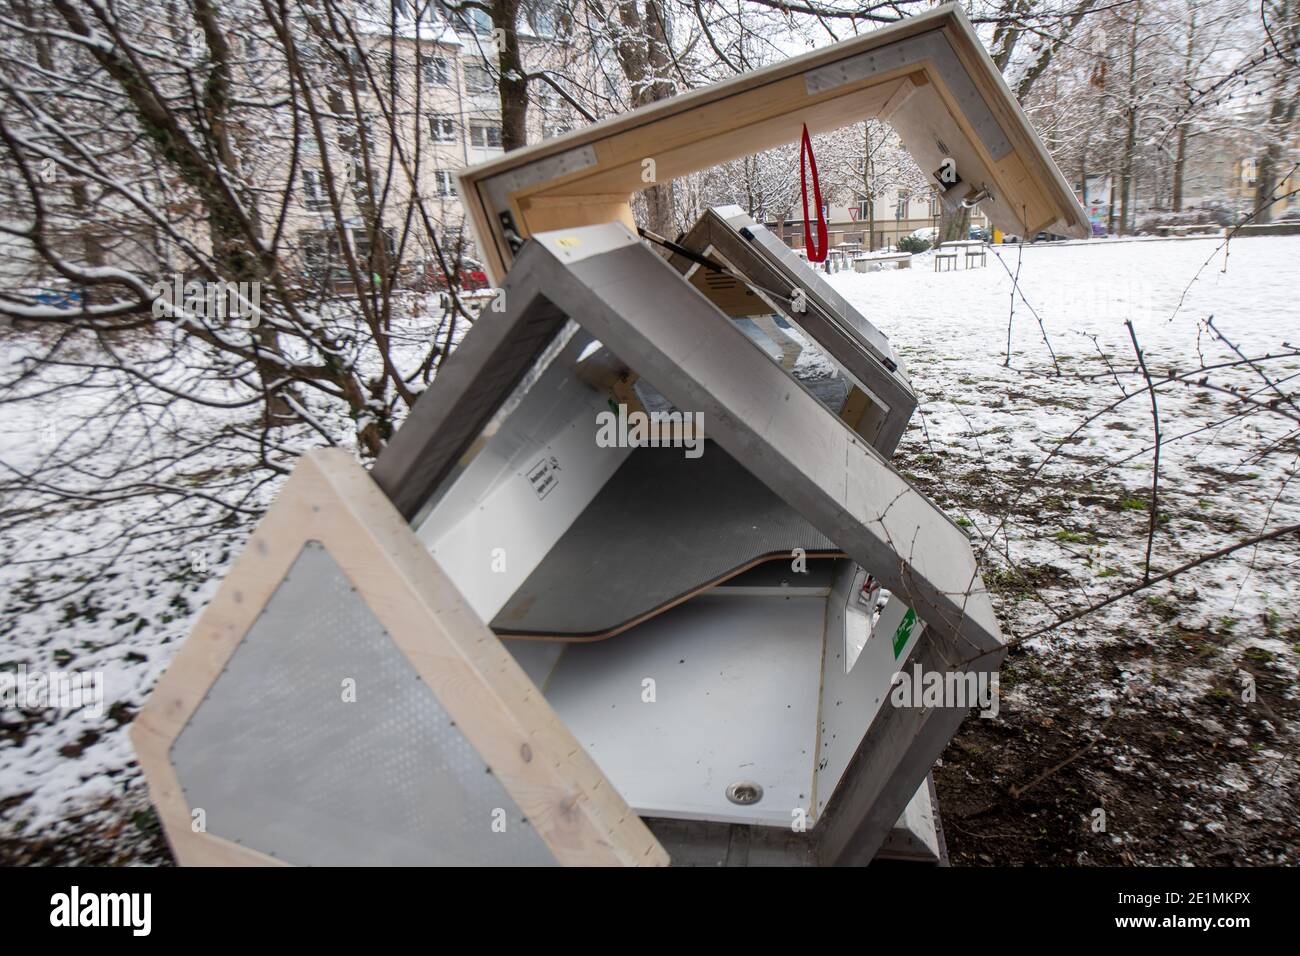 Ulm, Germany. 08th Jan, 2021. In the city park at Karlsplatz there is an  open sleeping pod for the overnight accommodation of homeless people. The  so-called "Ulmer Nester" were revised after a